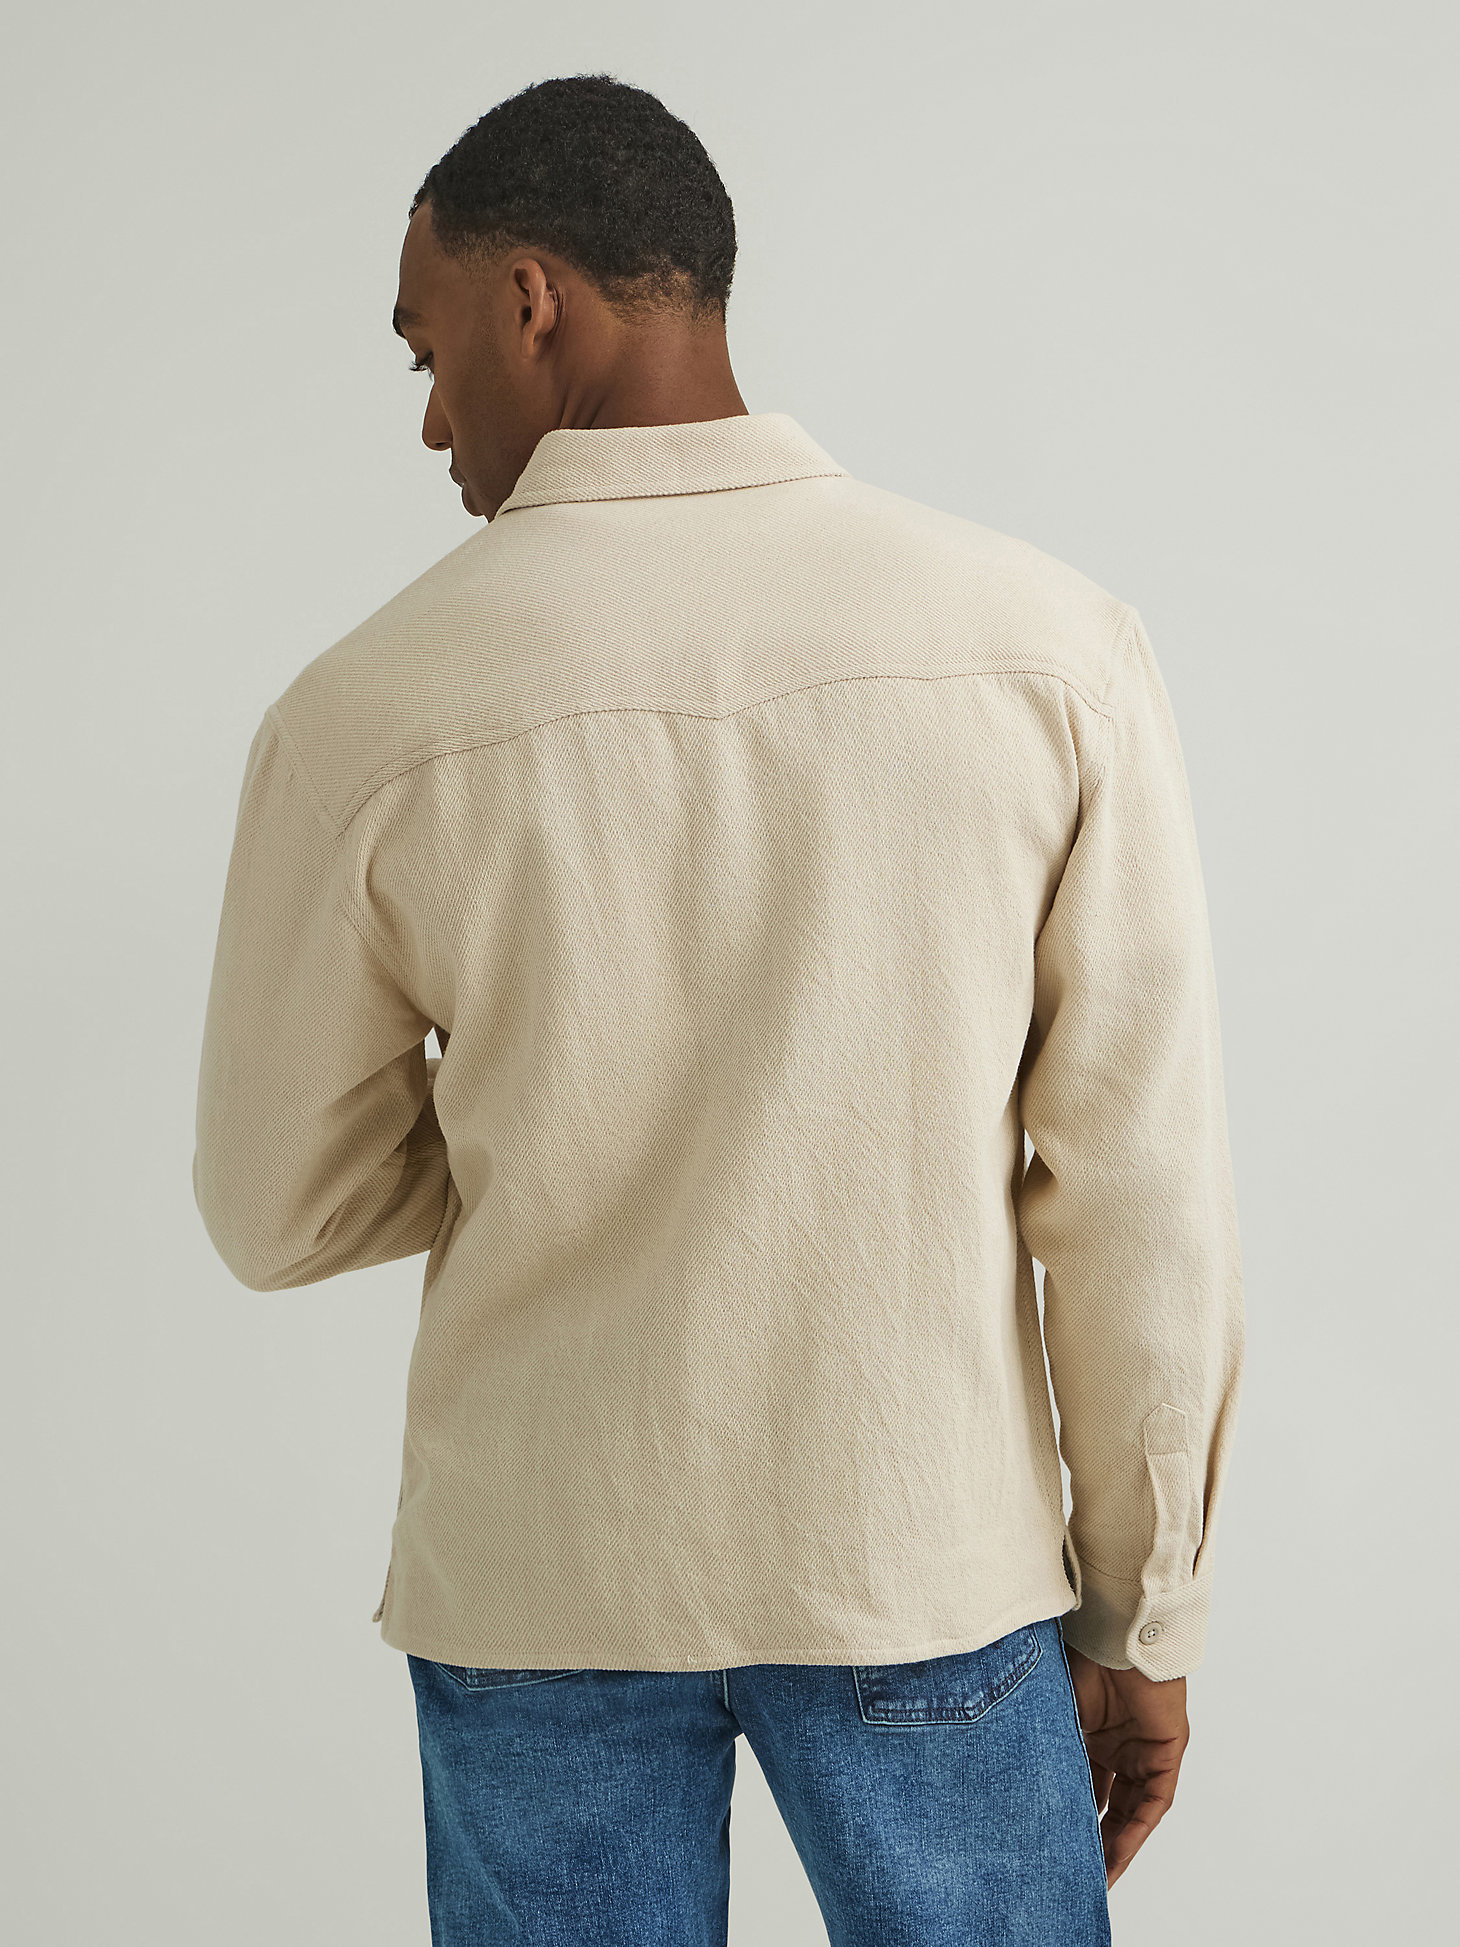 Men's Twill Overshirt in Oatmeal alternative view 3